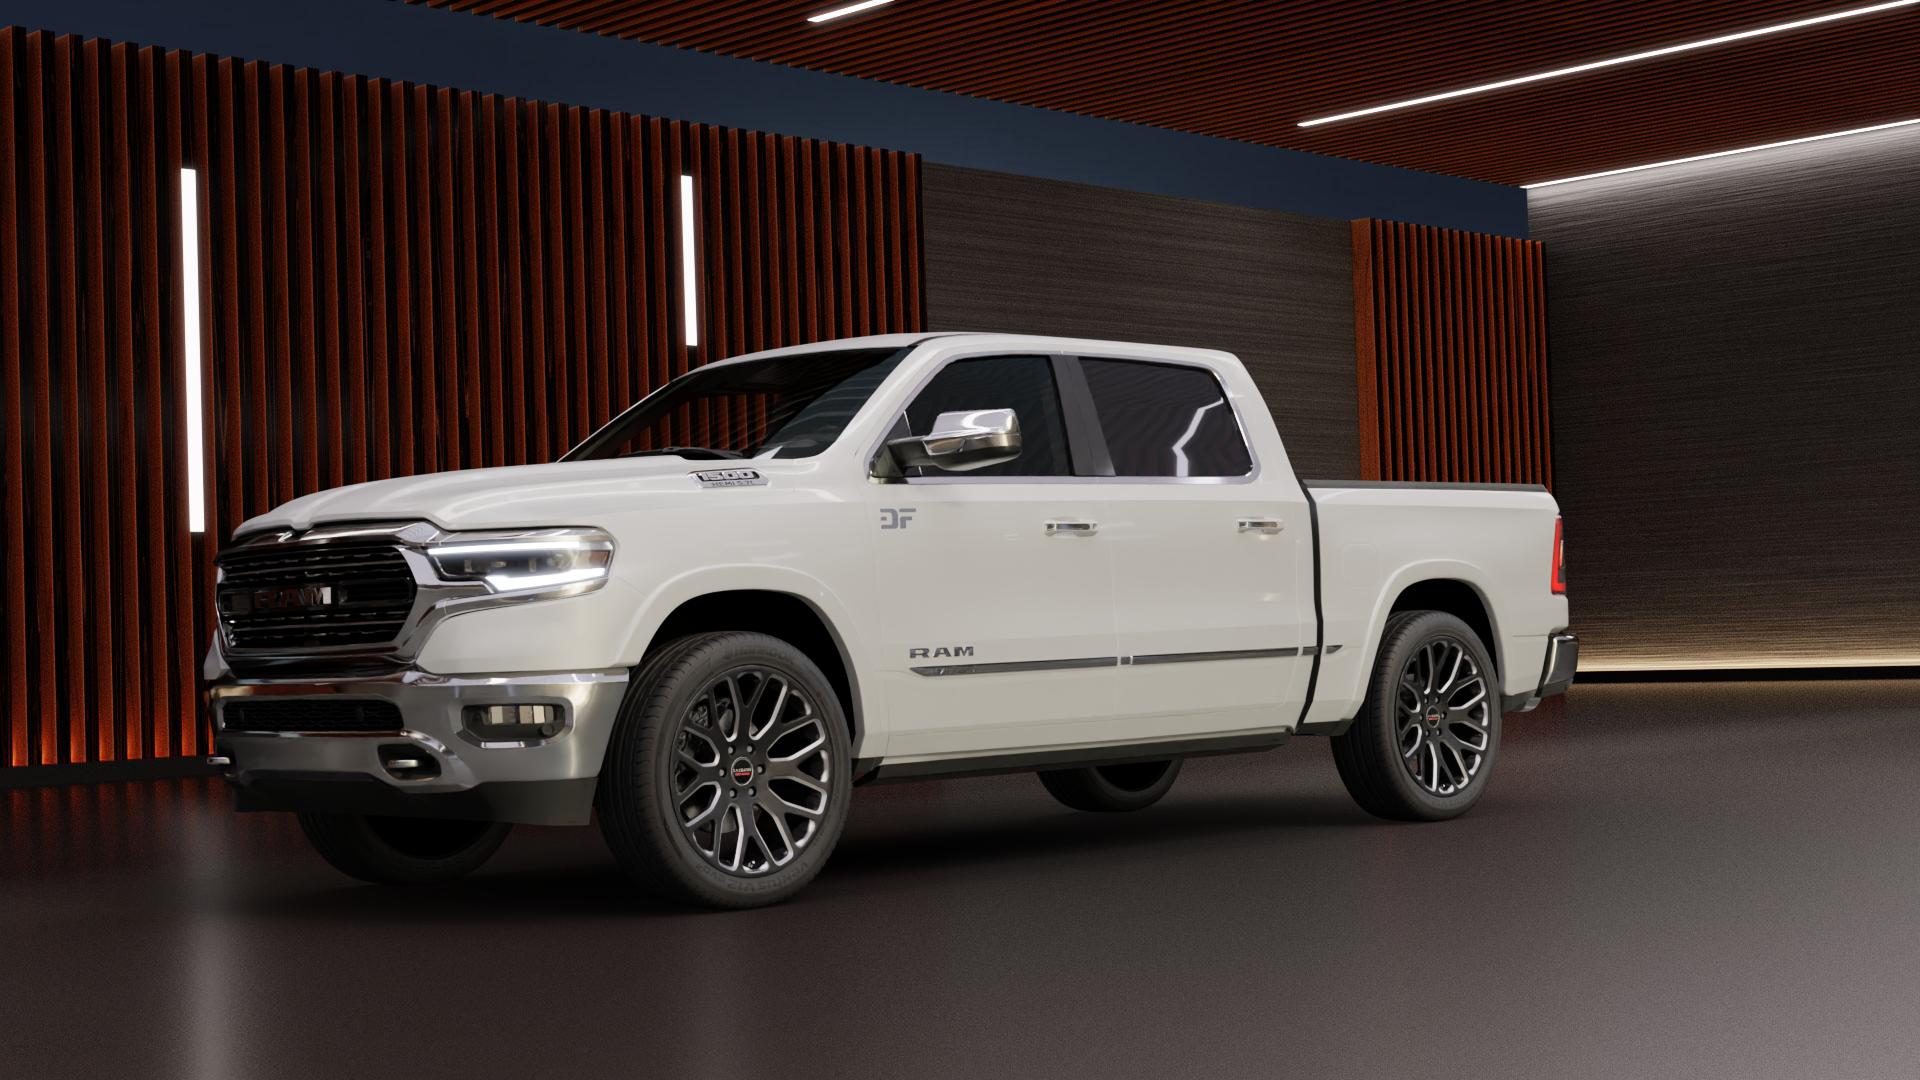 Dodge RAM 1500 V 6,2l V8 TRX 523kW 4x4 (711 hp) Wheels and Tyre Packages